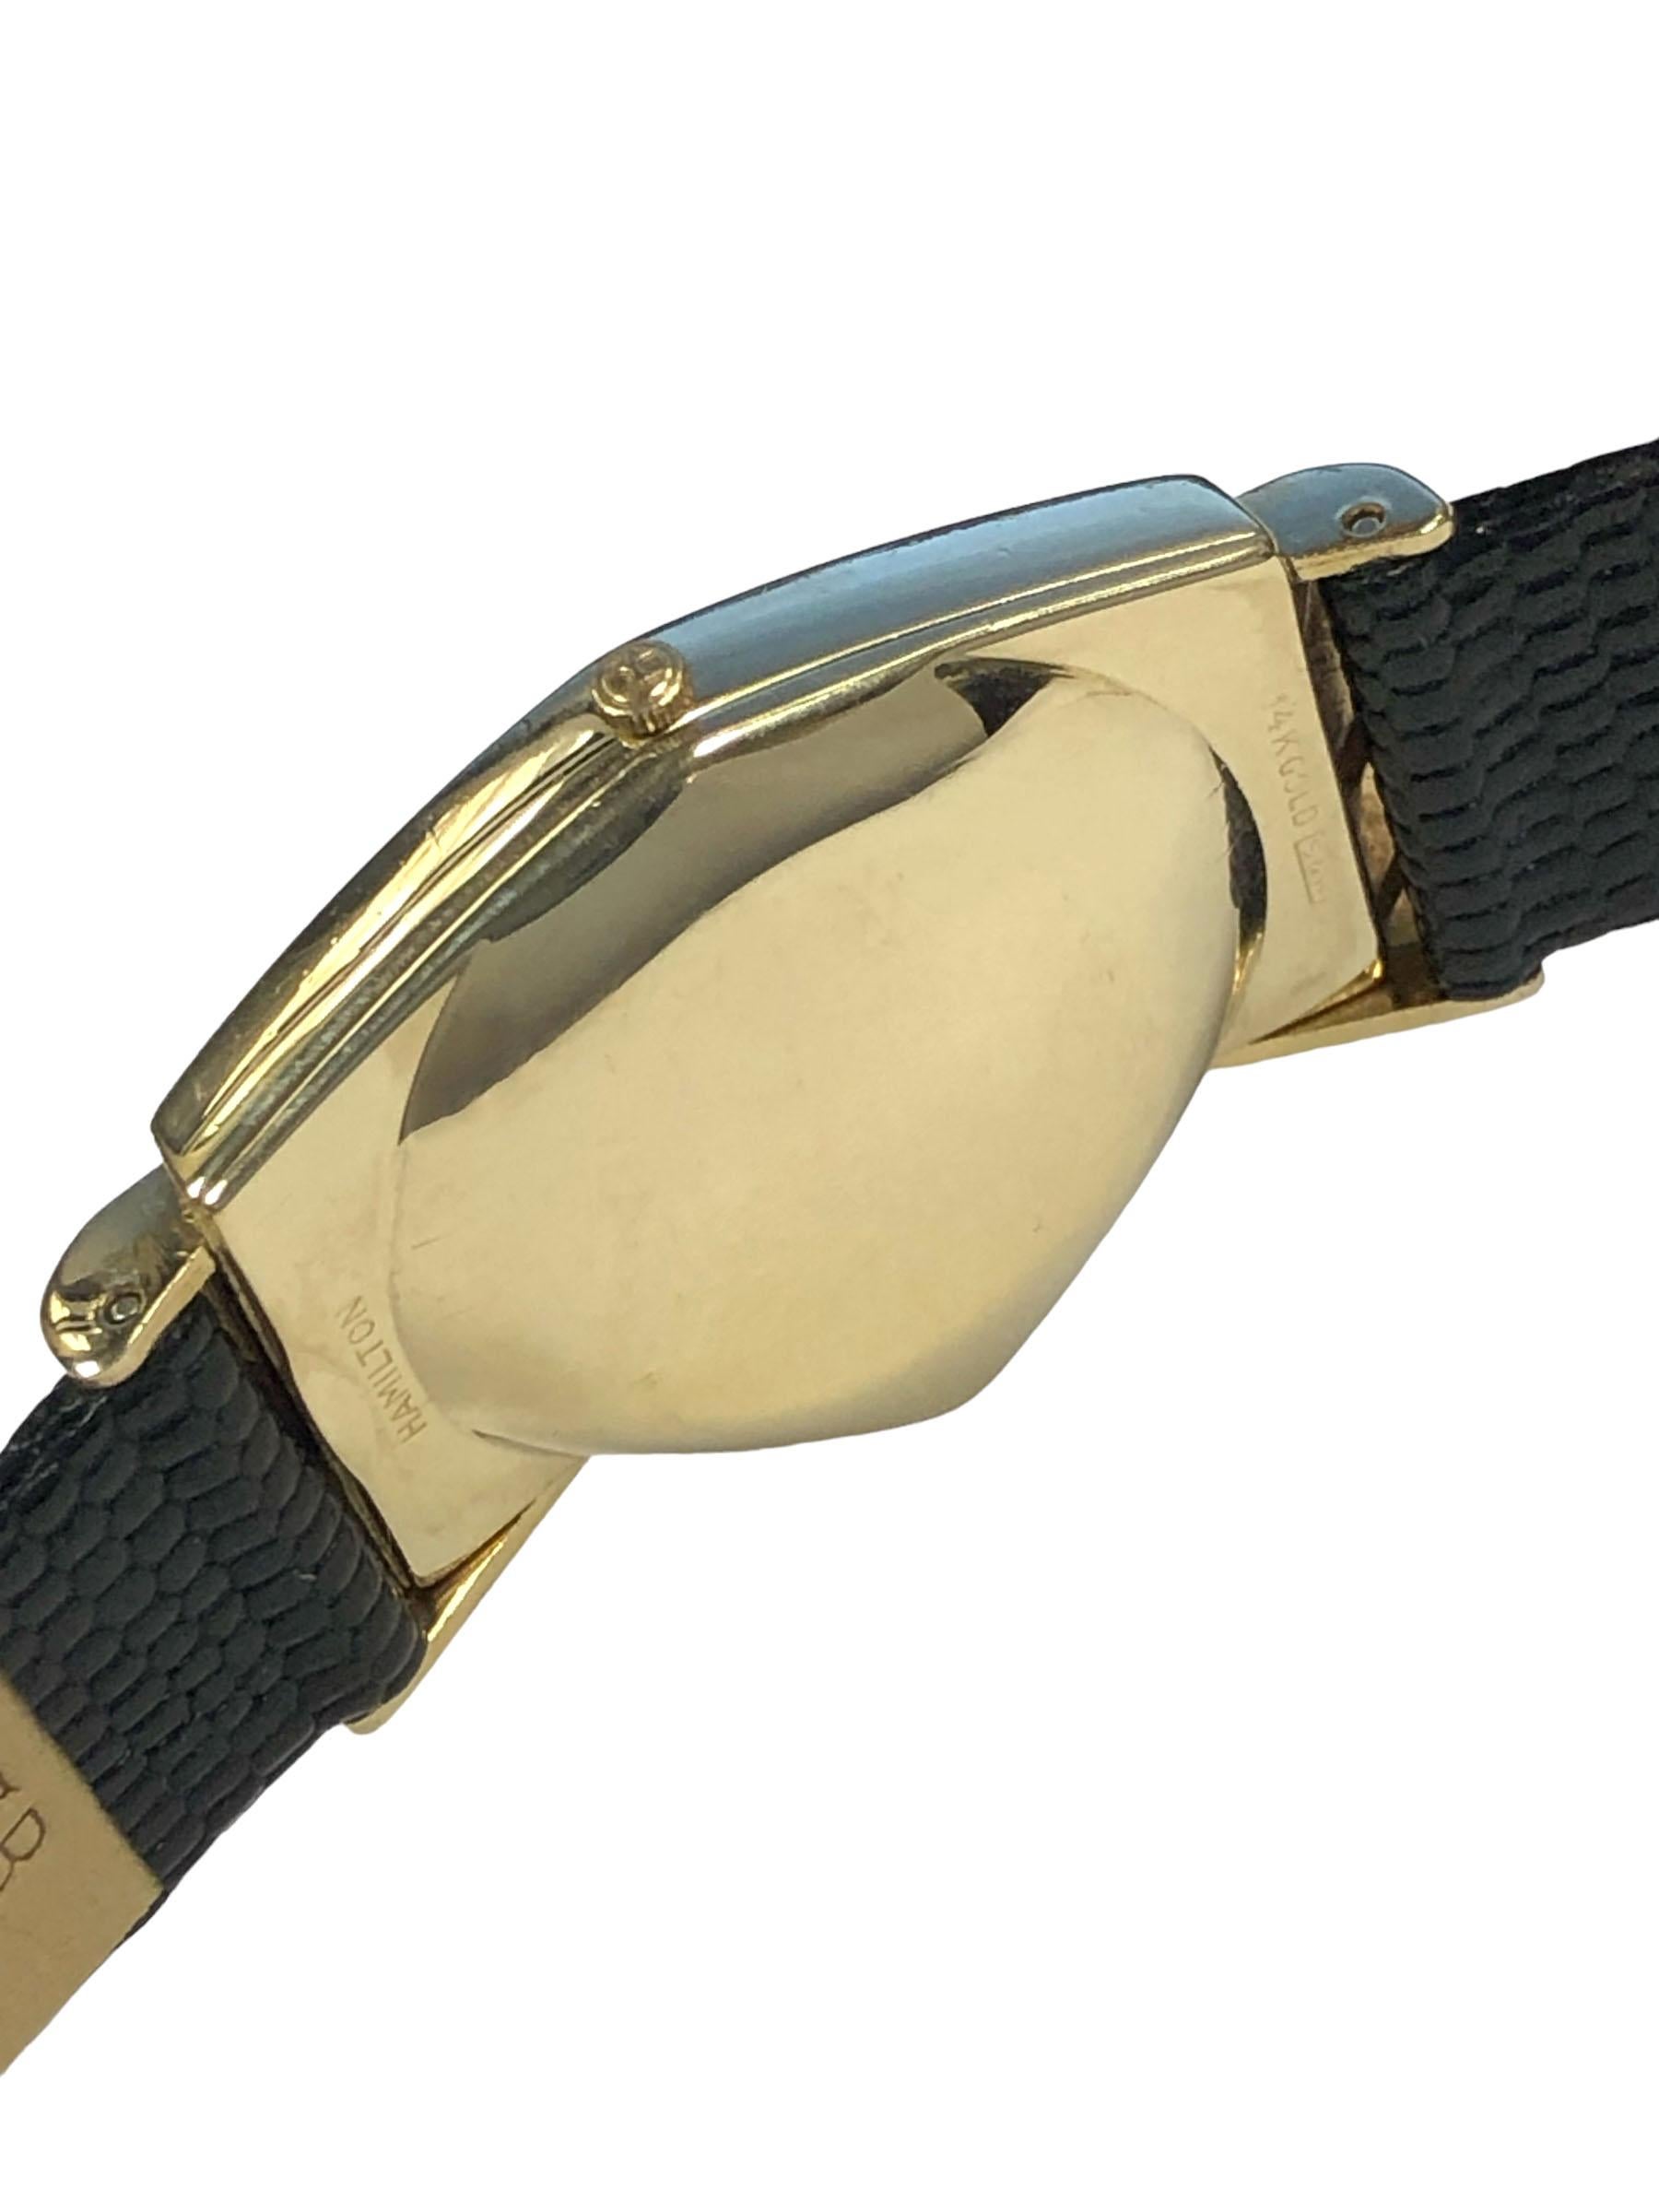 Circa 1960 Hamilton Electric Ventura Wrist Watch, 14k Yellow Gold 2 piece case, Hamilton 505 Electronic movement, Black dial with raised gold dot markers and a sweep seconds hand. New Black Lizard grain strap, comes with a Hamilton Electric